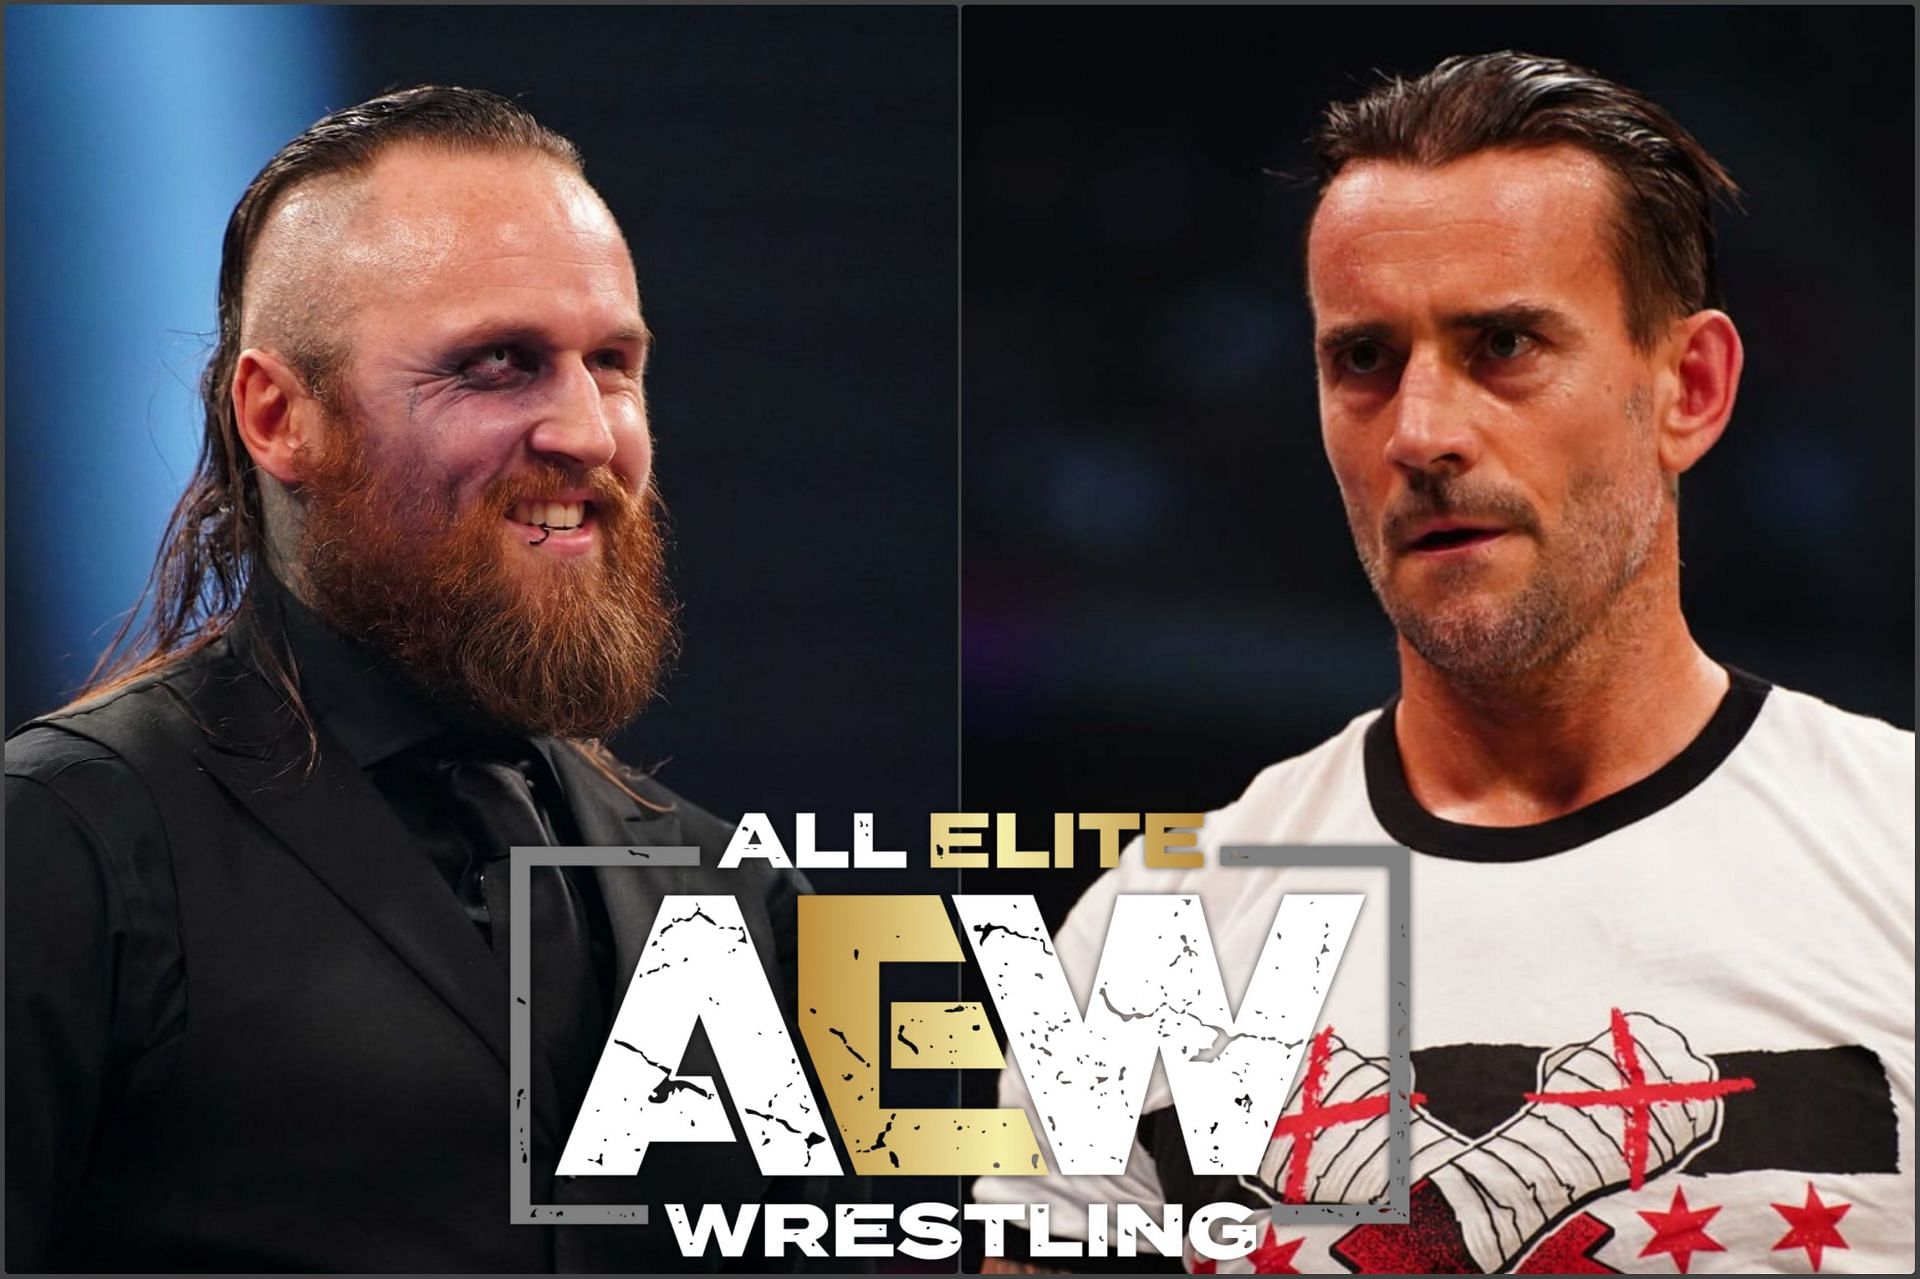 Malakai Black and CM Punk could put on a great match